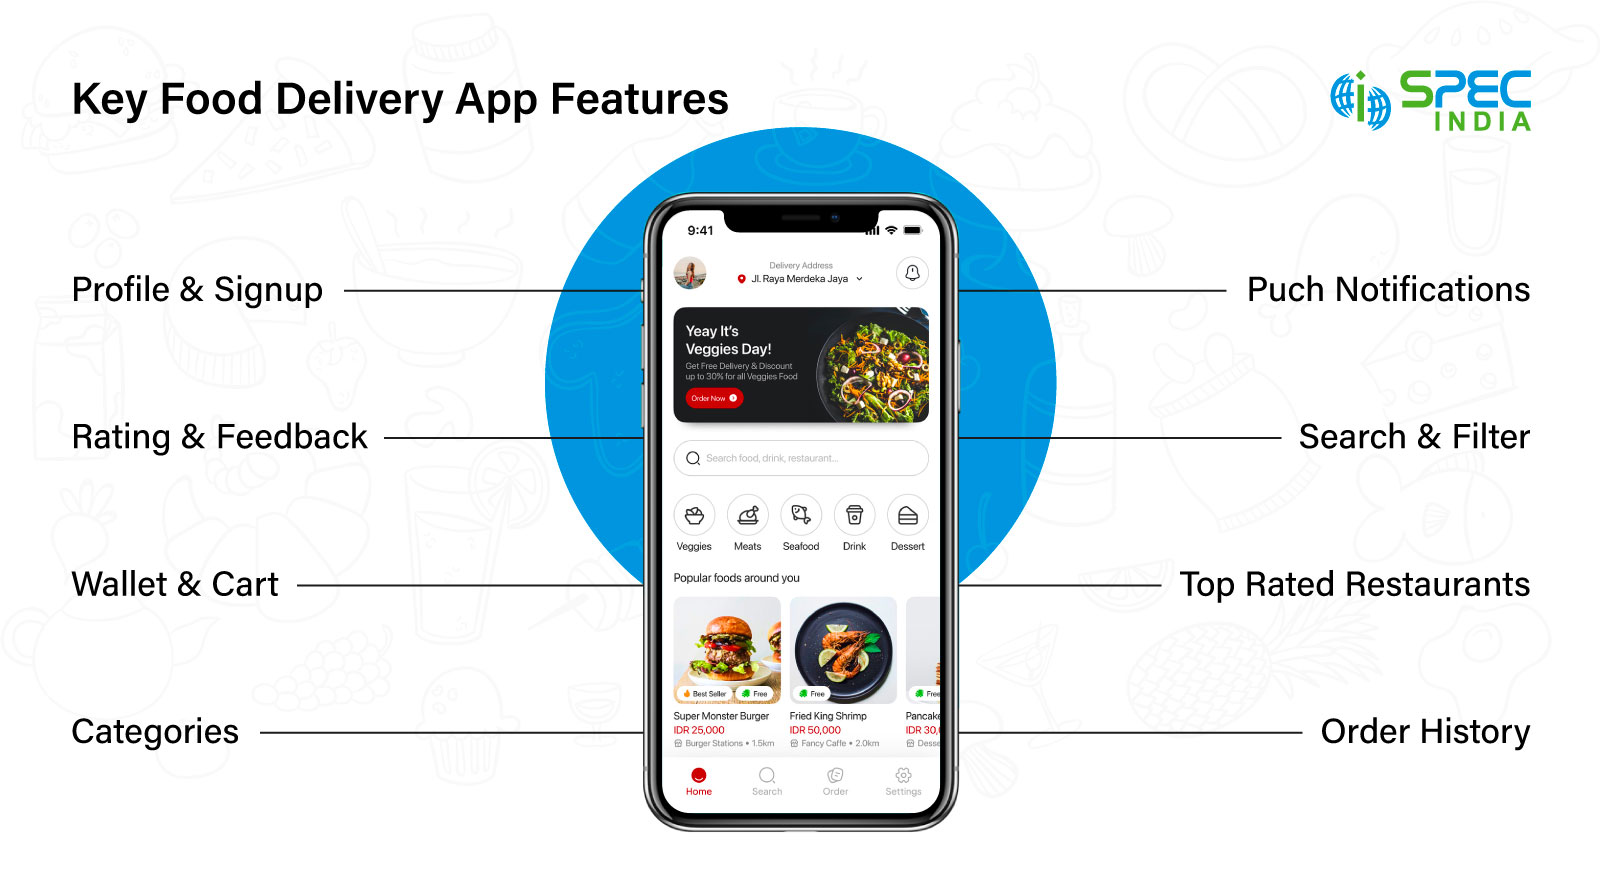 Key Food Delivery App Features